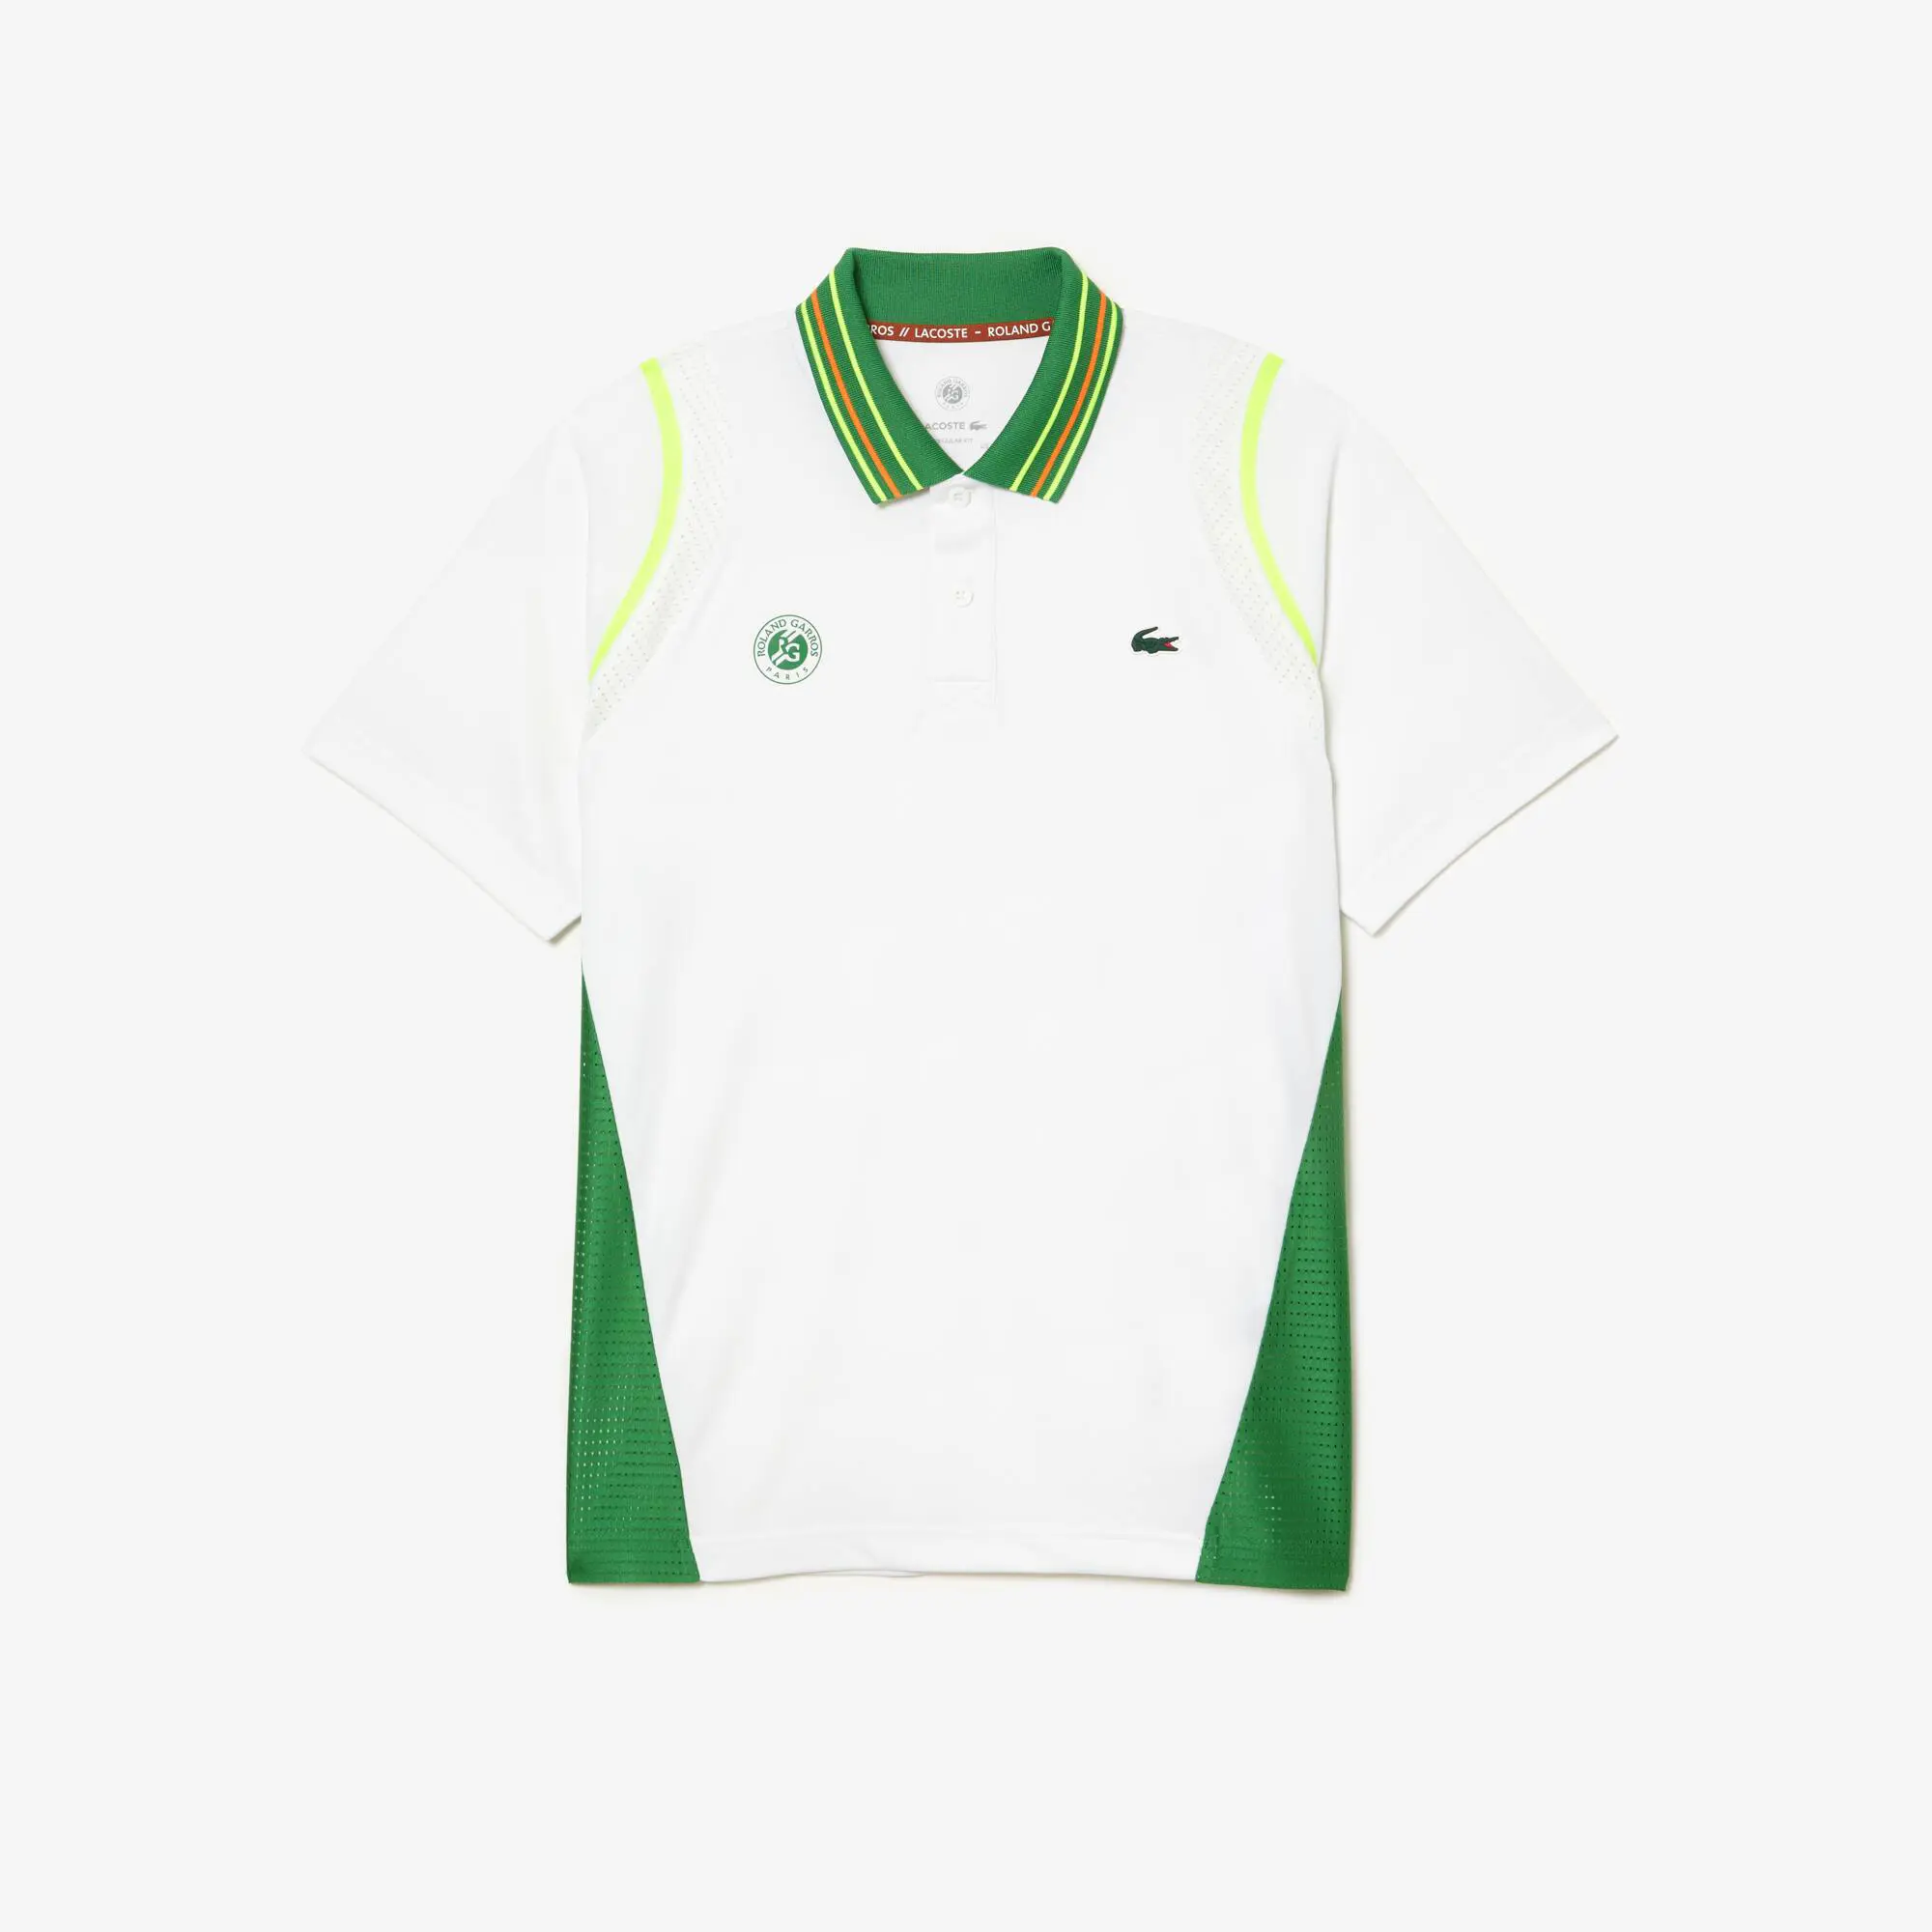 Lacoste Herren LACOSTE SPORT French Open Edition zweifarbiges Poloshirt in Ultra-Dry-Technologie. 2